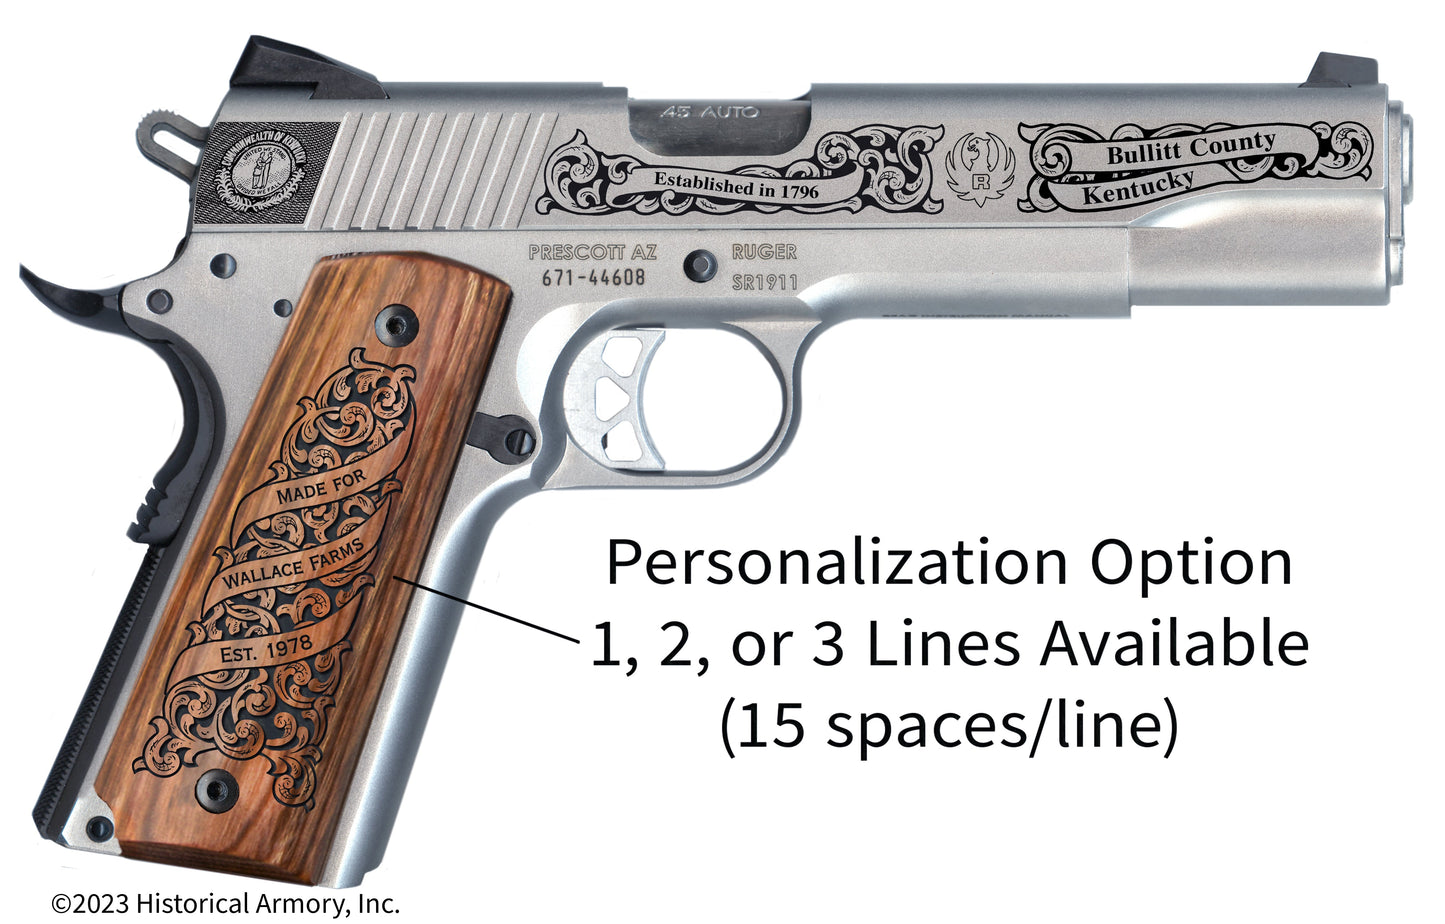 Bullitt County Kentucky Personalized Engraved .45 Auto Ruger 1911